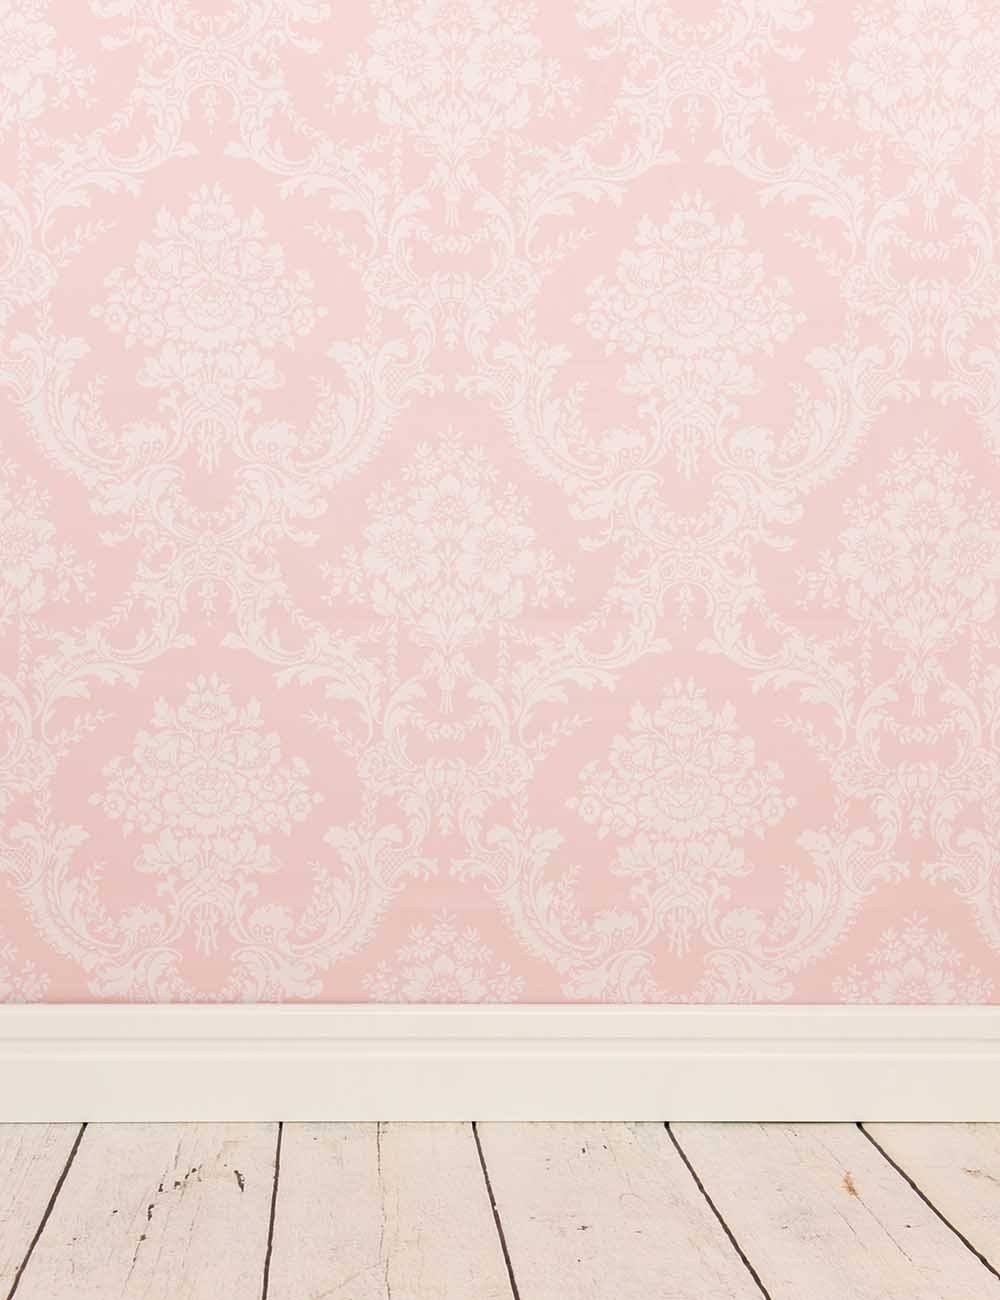 Milk White Damask Printed On Pink Wall With Wood Floor Backdrop For Photo Shopbackdrop